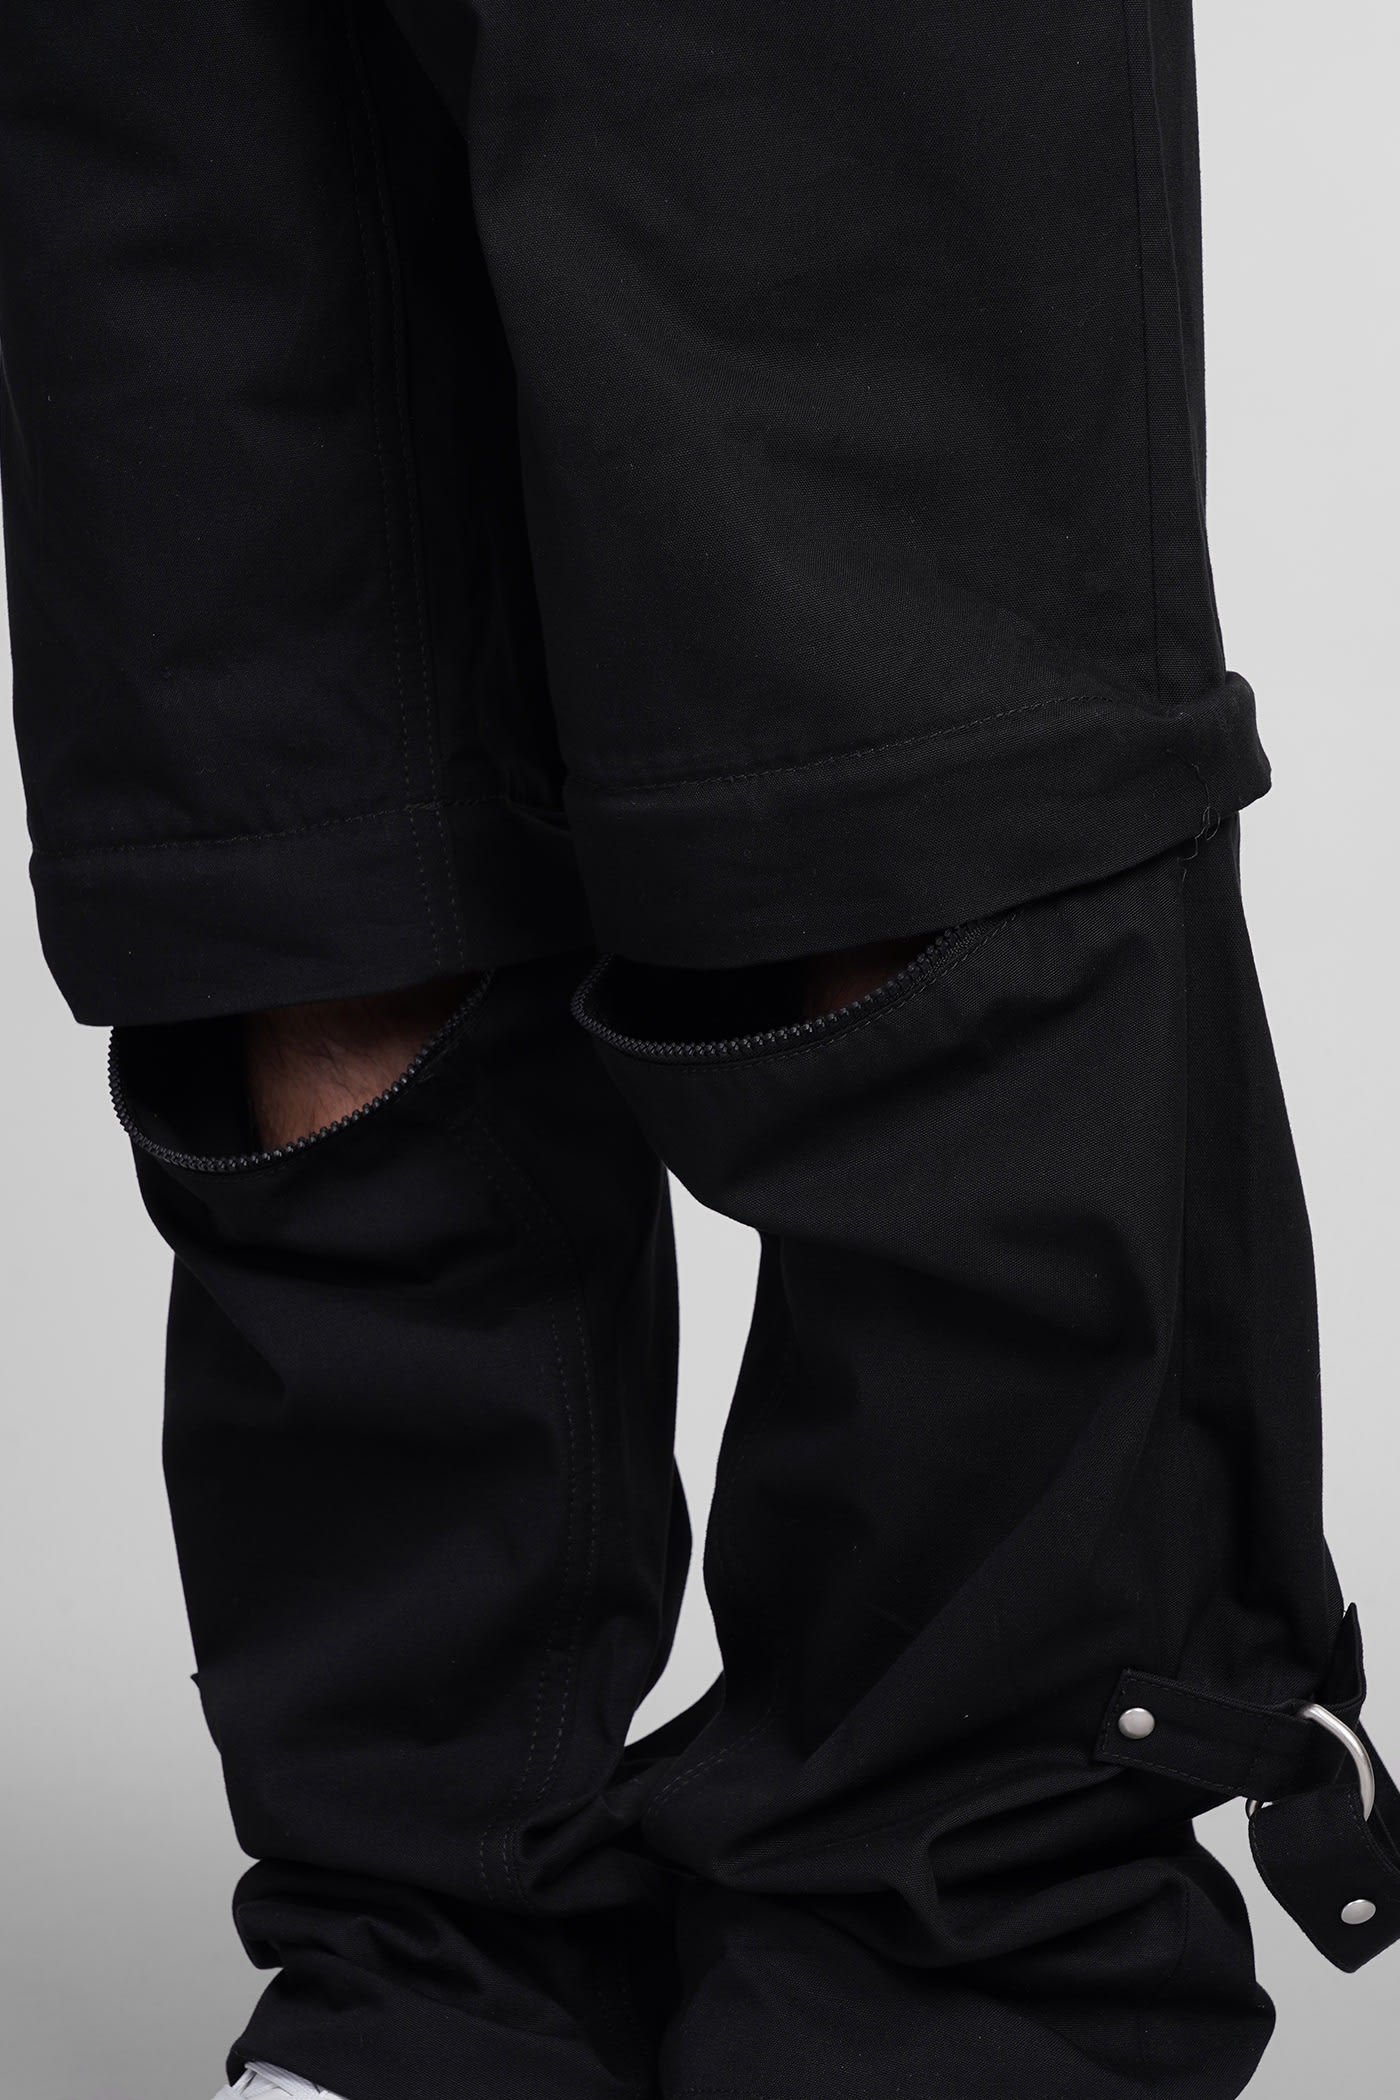 Givenchy: Black 4G Embroidered Lounge Pants